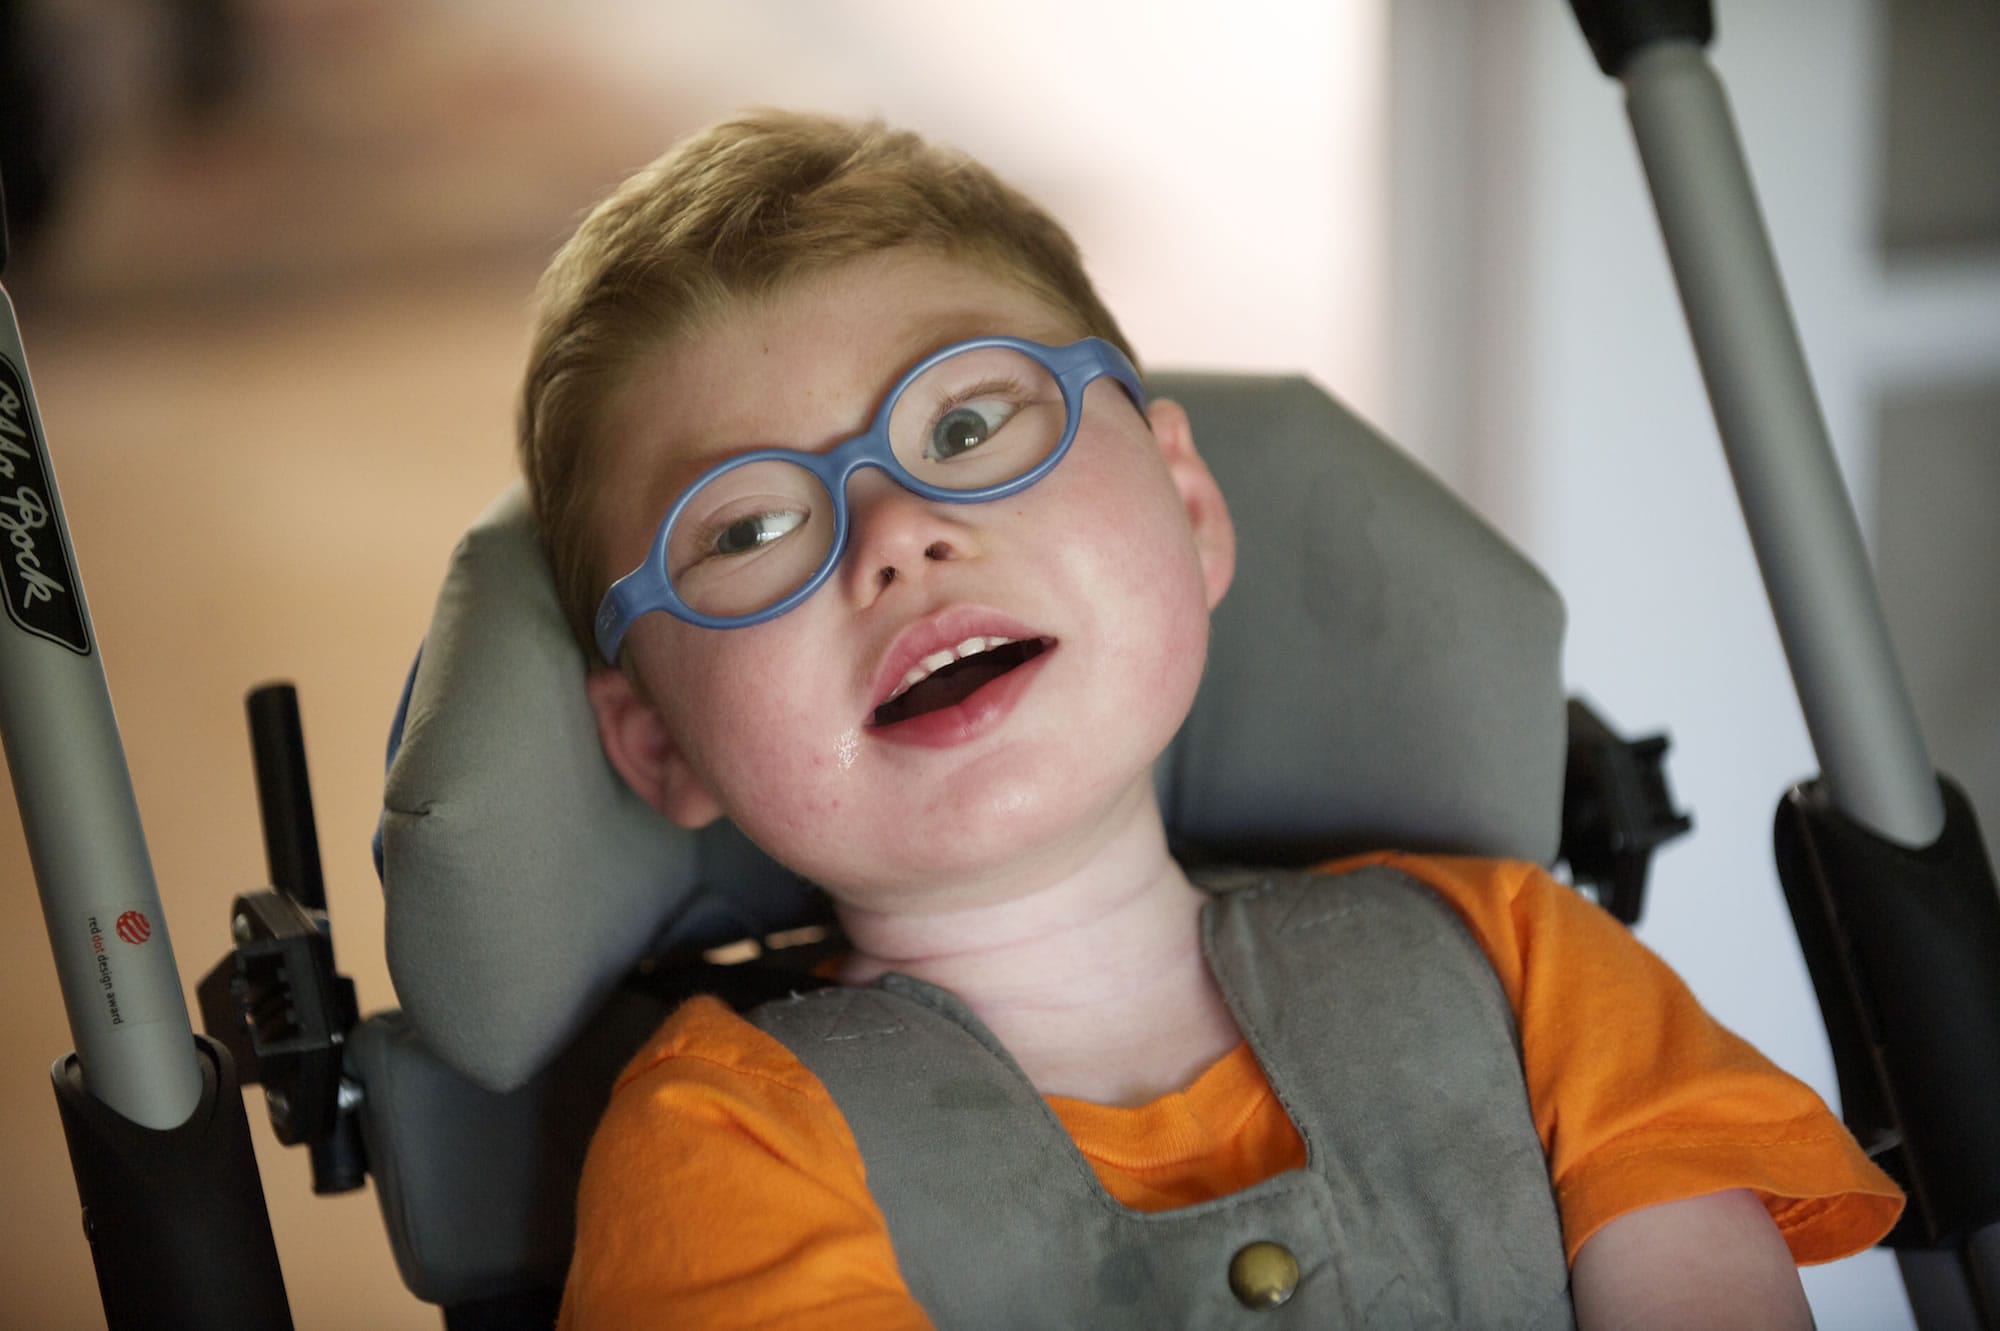 Micah Snell, 3, was diagnosed with agenesis of the corpus callosum, a condition that falls under the umbrella of cerebral palsy, before he was born.